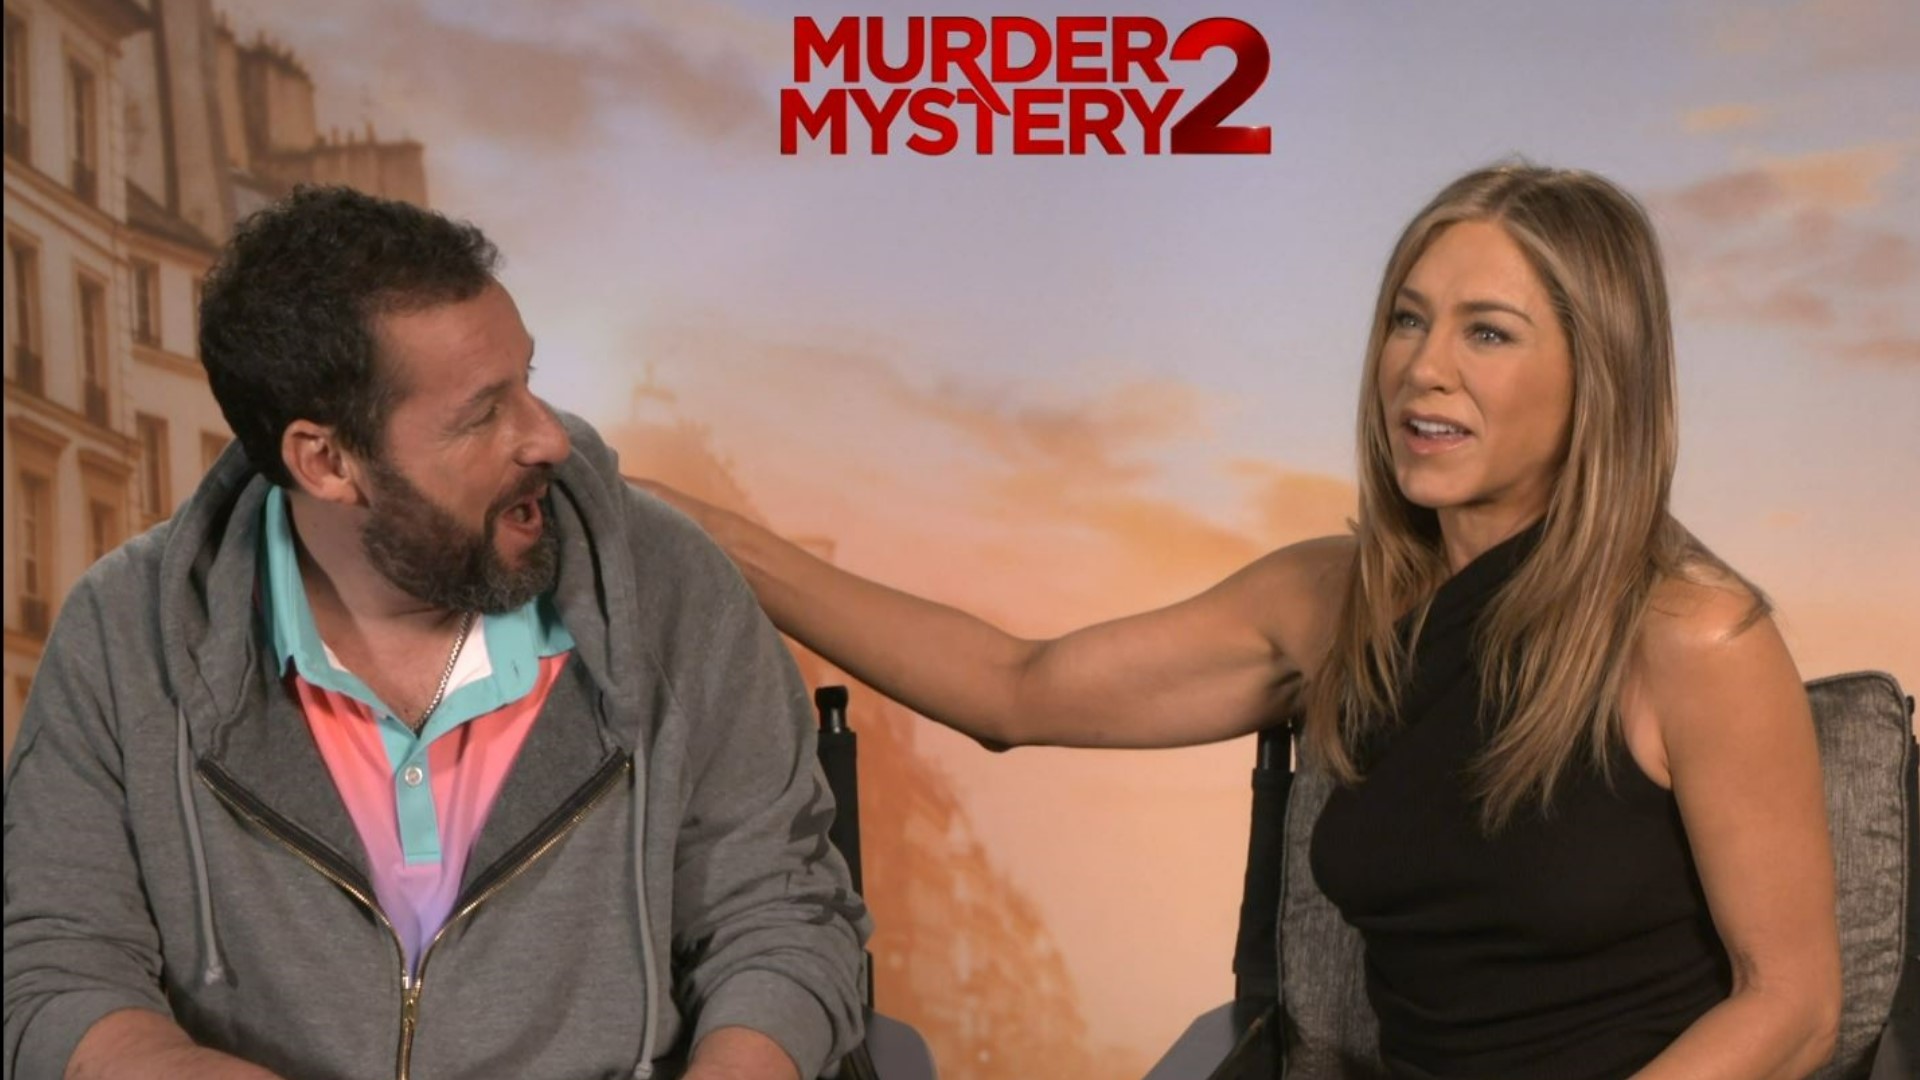 The longtime friends are reunited in new Netflix comedy "Murder Mystery 2." #k5evening